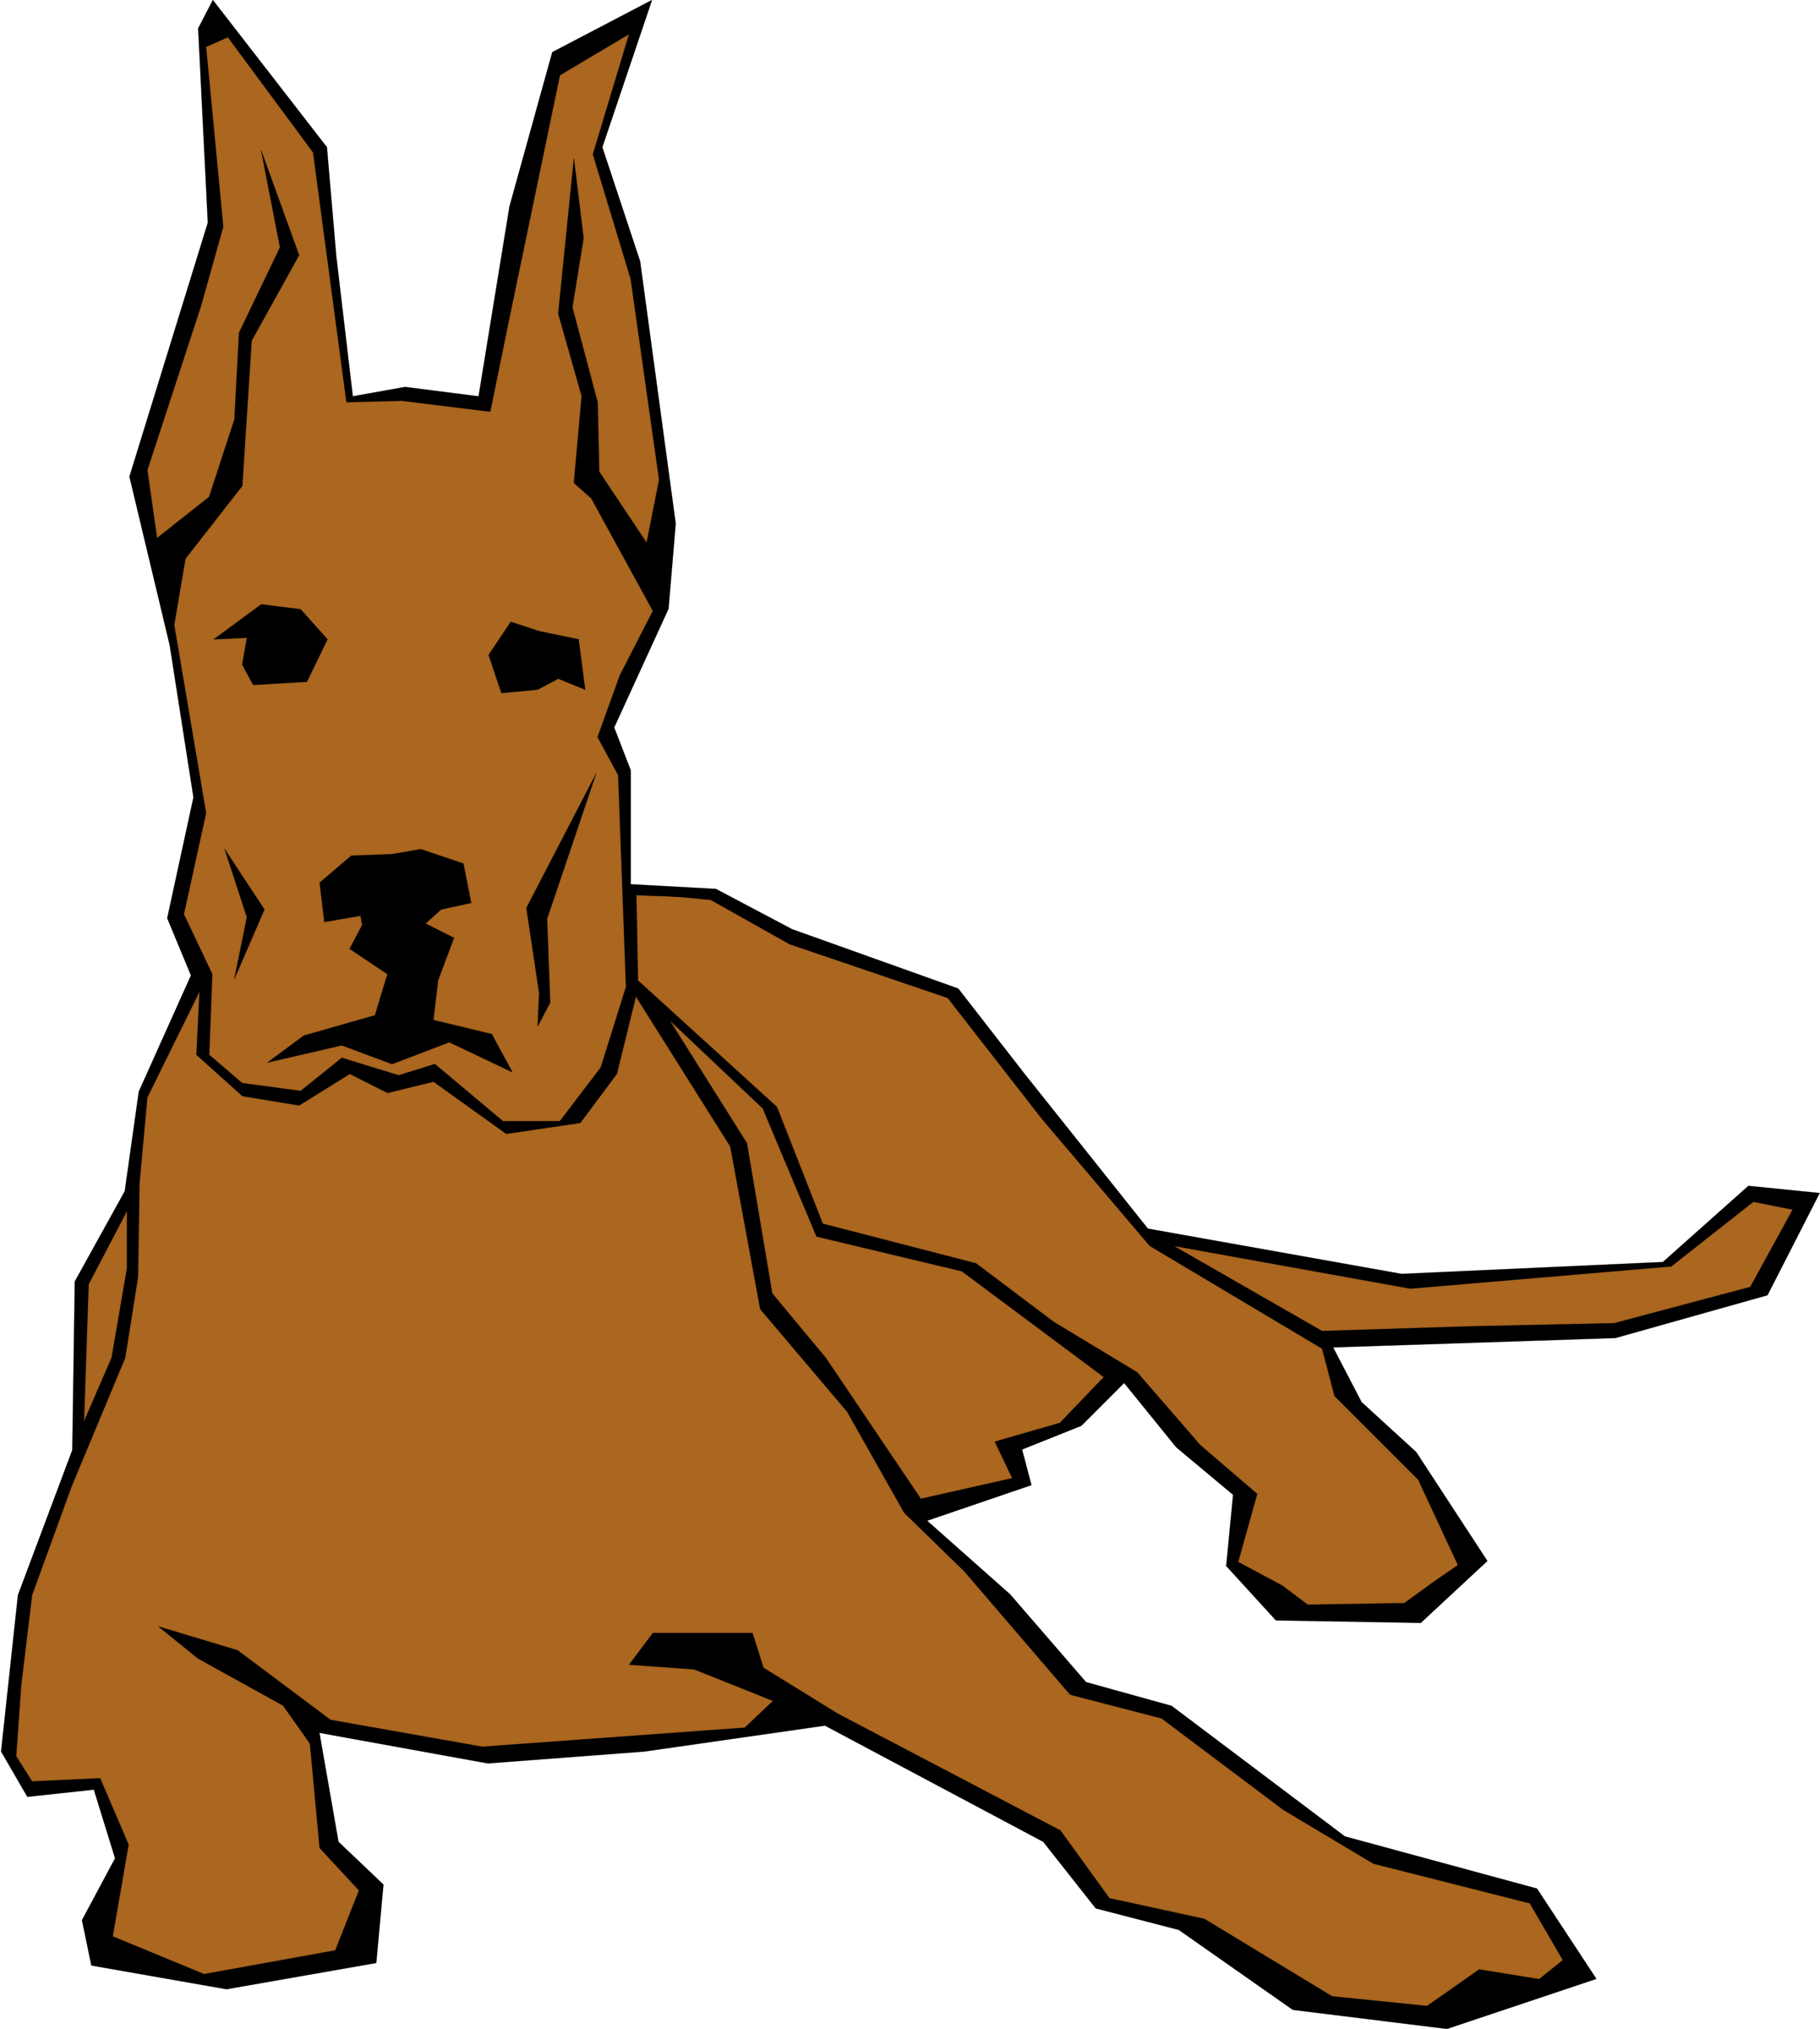 Simple drawing of dog. Clipart dogs yorkie